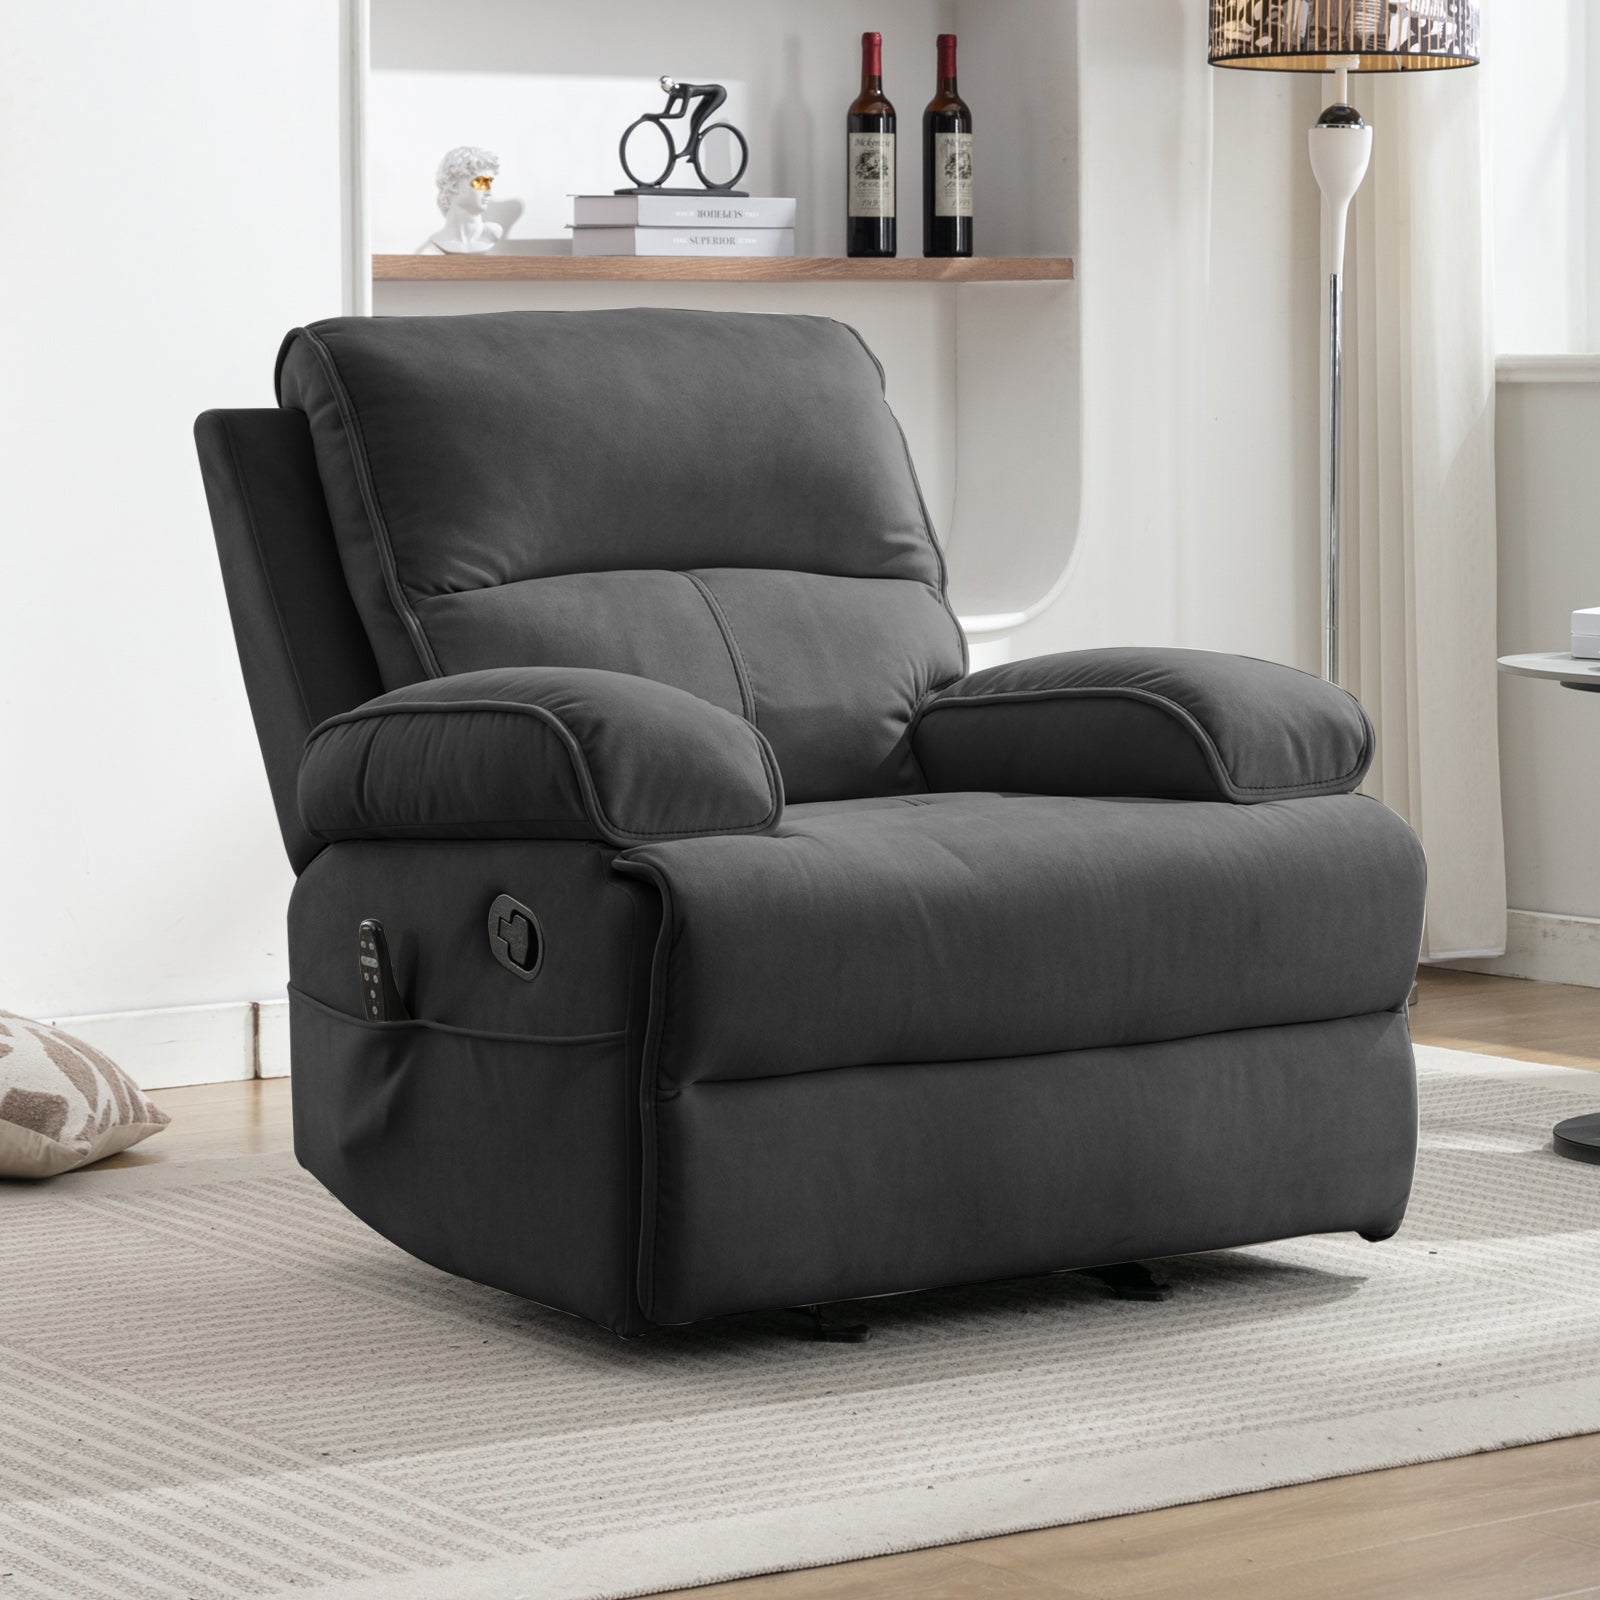 Mjkone Recliner Chair For S Baby